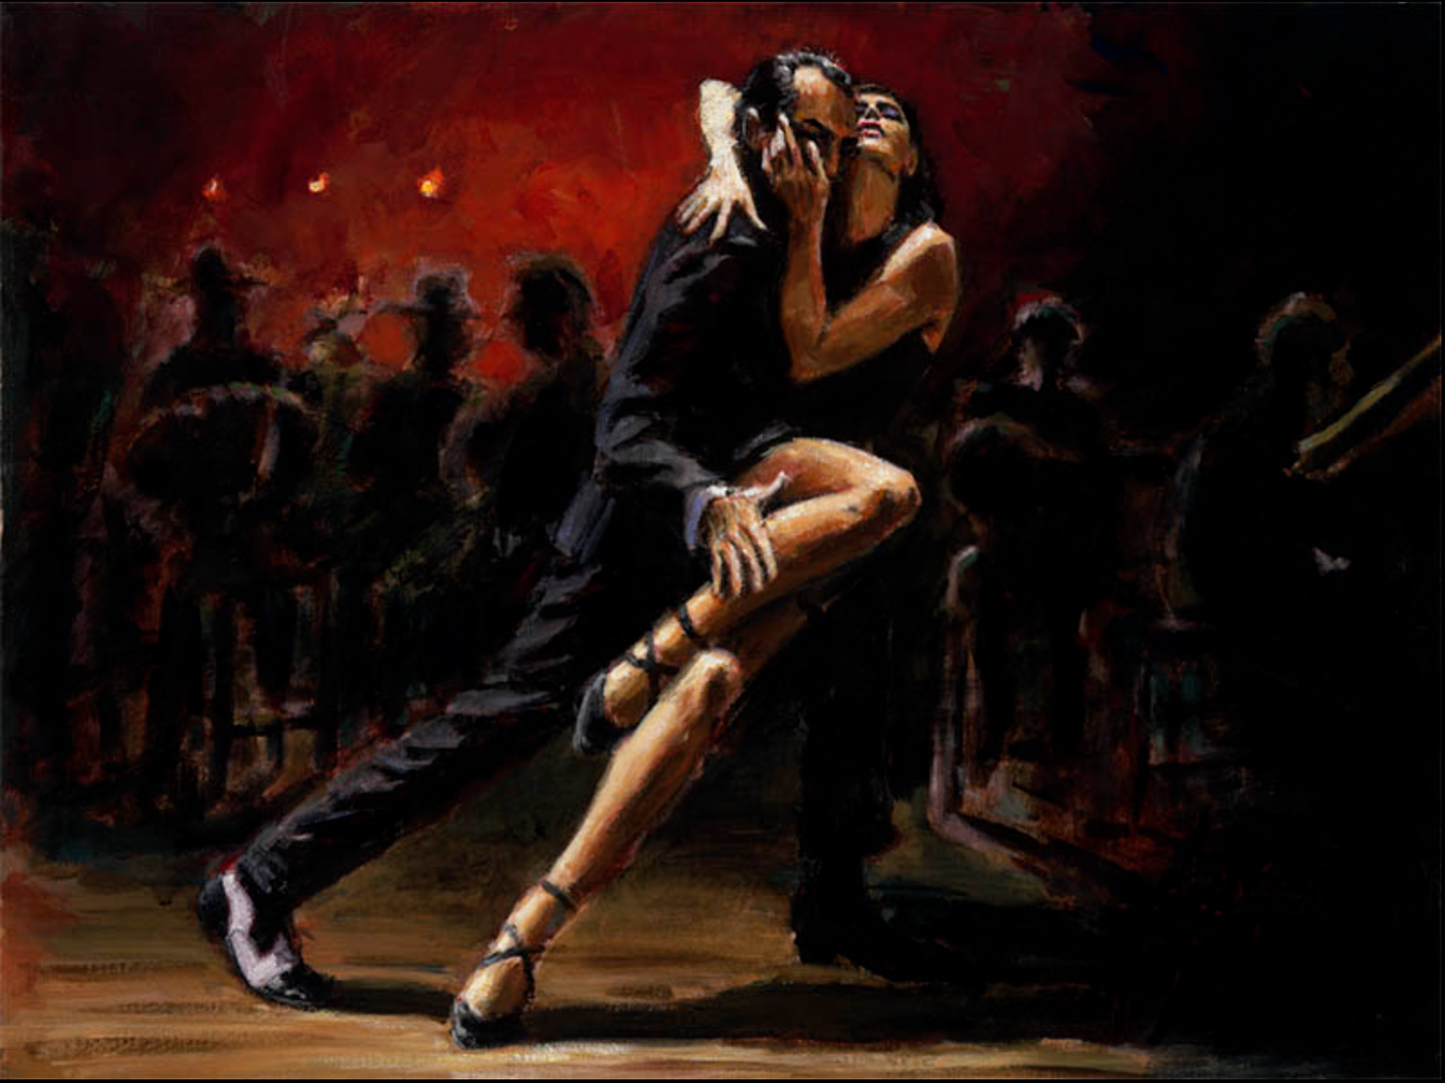 Tango in Red (US) by Fabian Perez